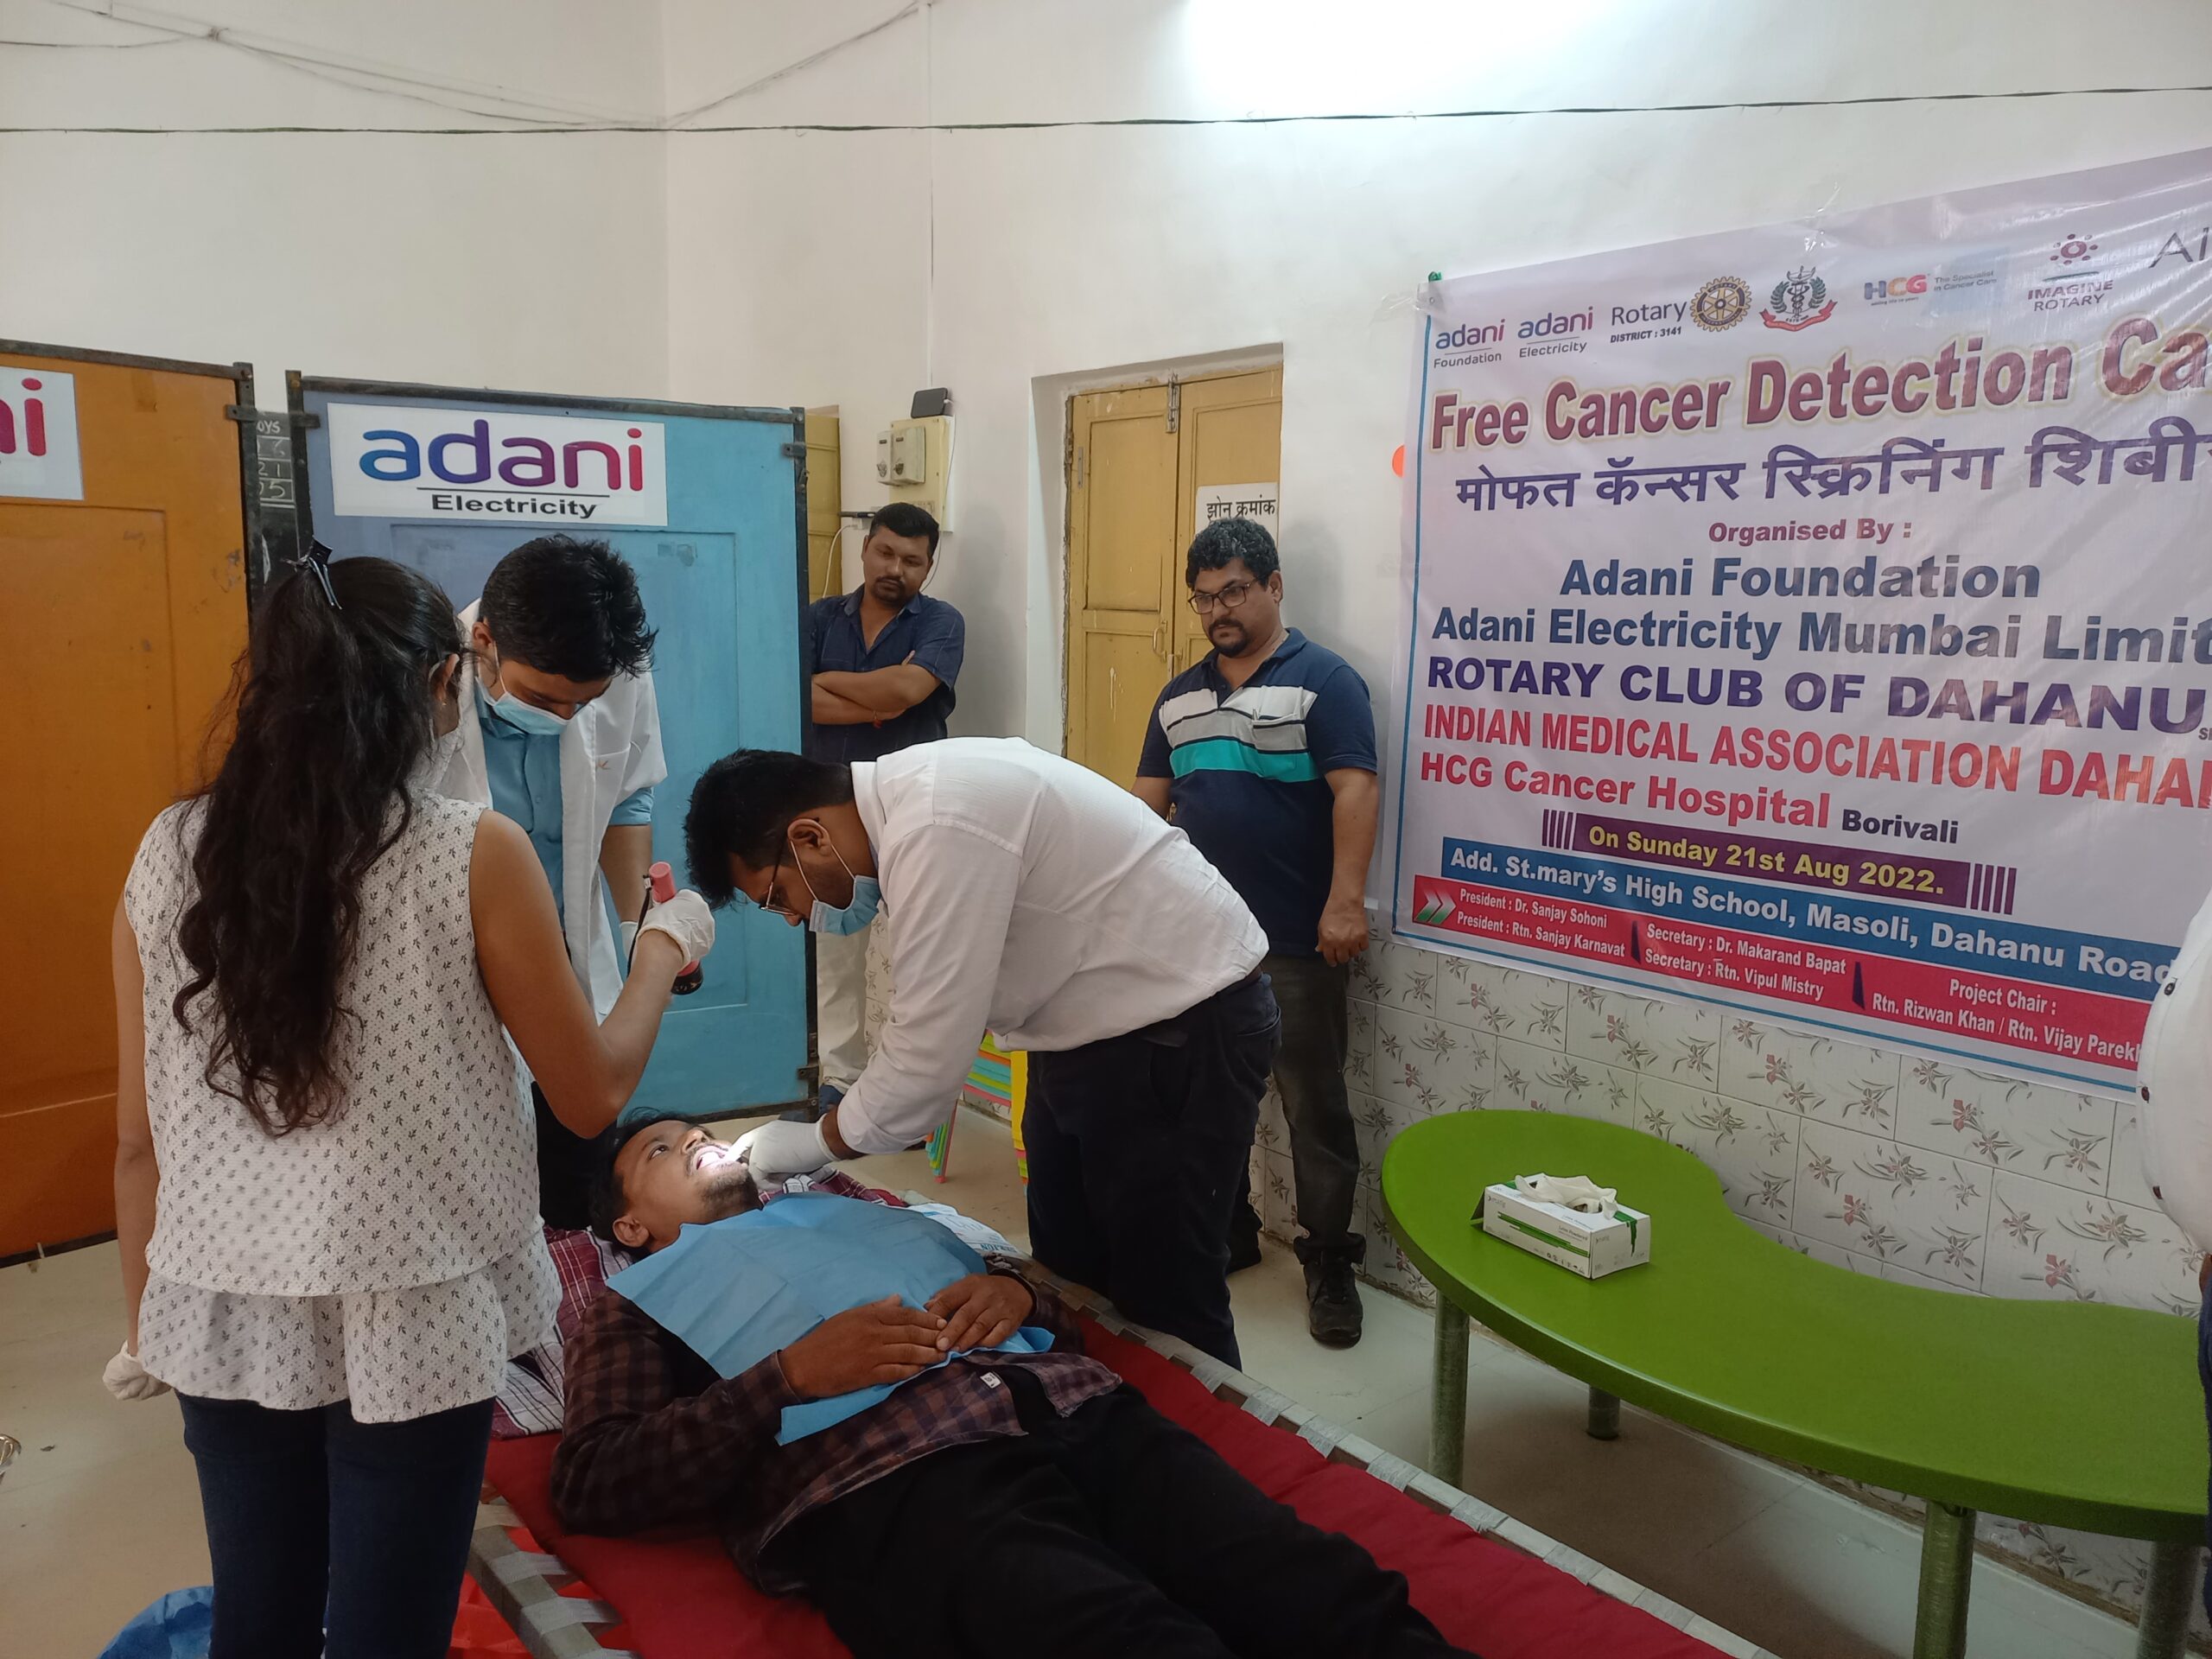 ADTPS, AEML and Adani Foundation organise Cancer Detection Camp in Dahanu